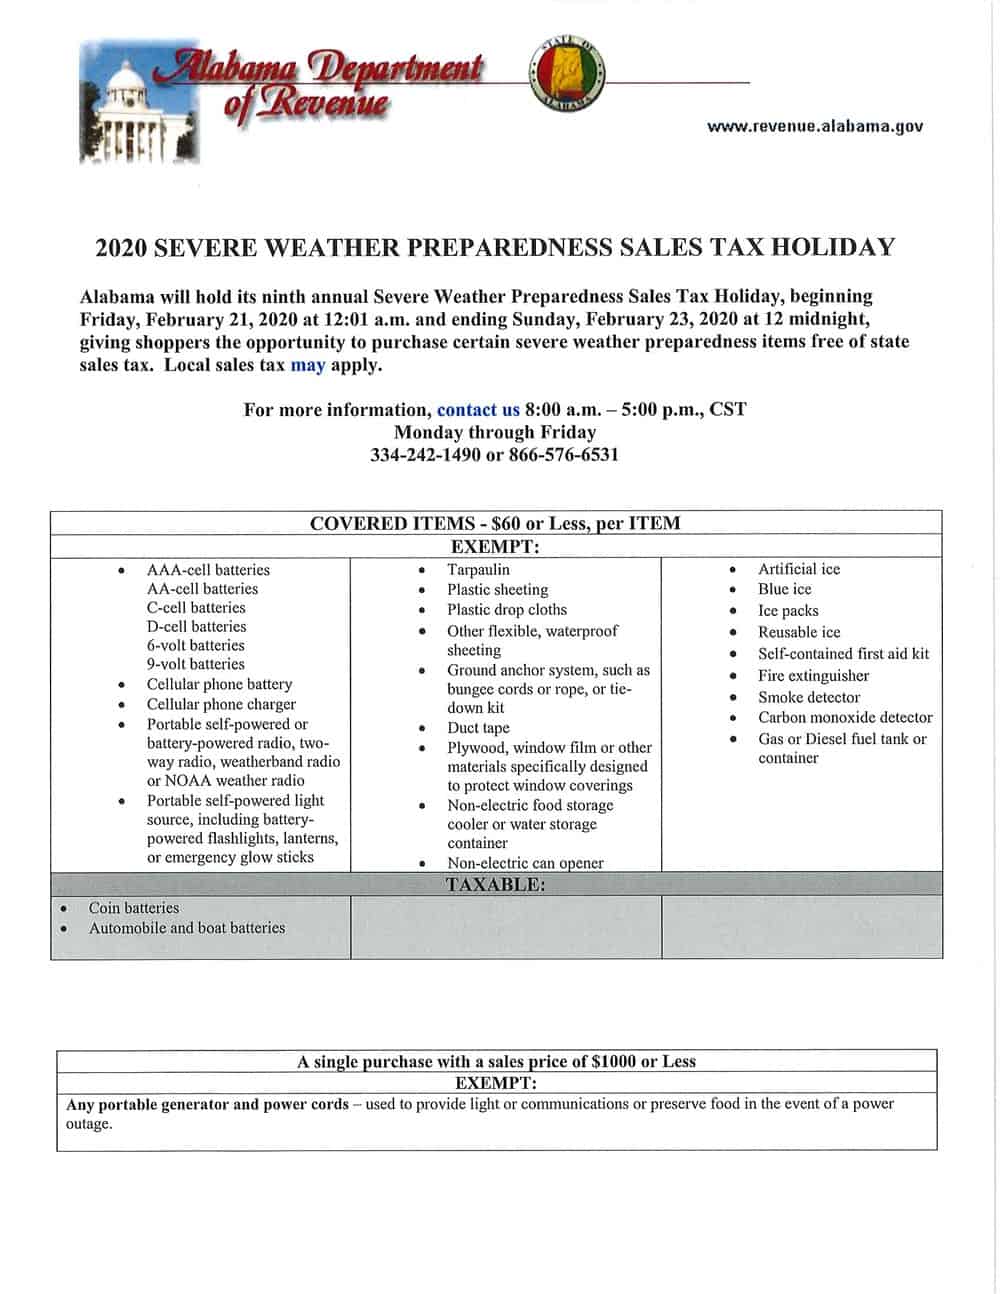 Severe Weather Sales Tax Holiday 2